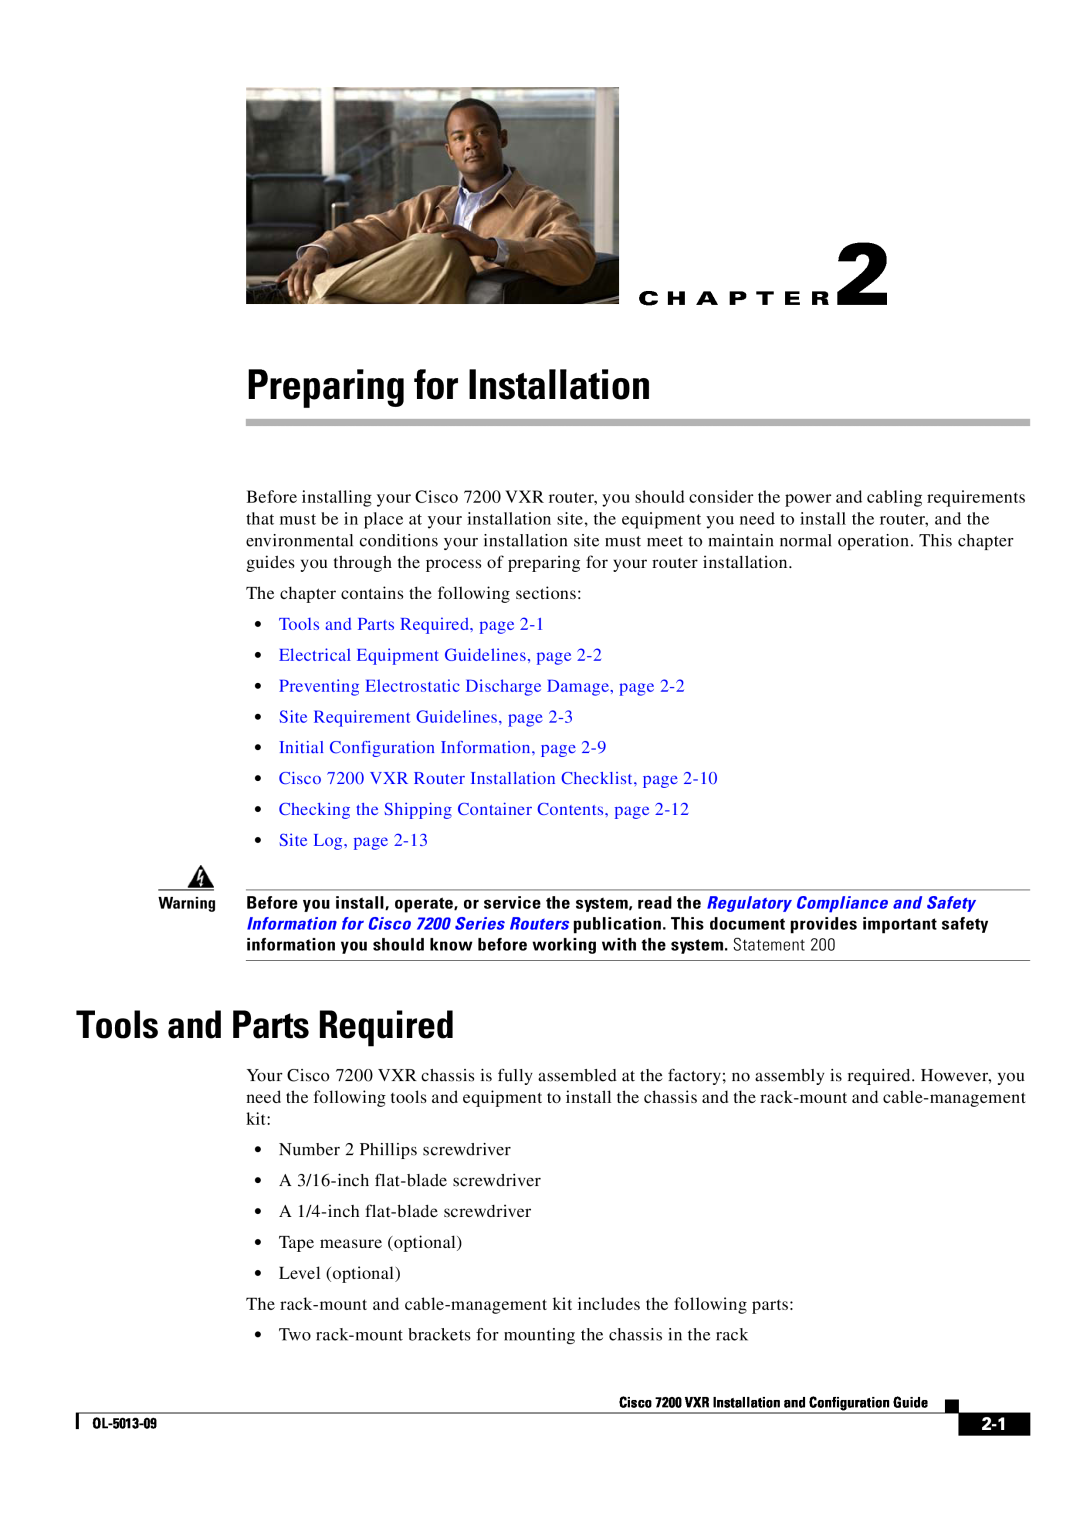 Cisco Systems 7200 VXR manual Preparing for Installation, Tools and Parts Required, Site Requirement Guidelines, page 